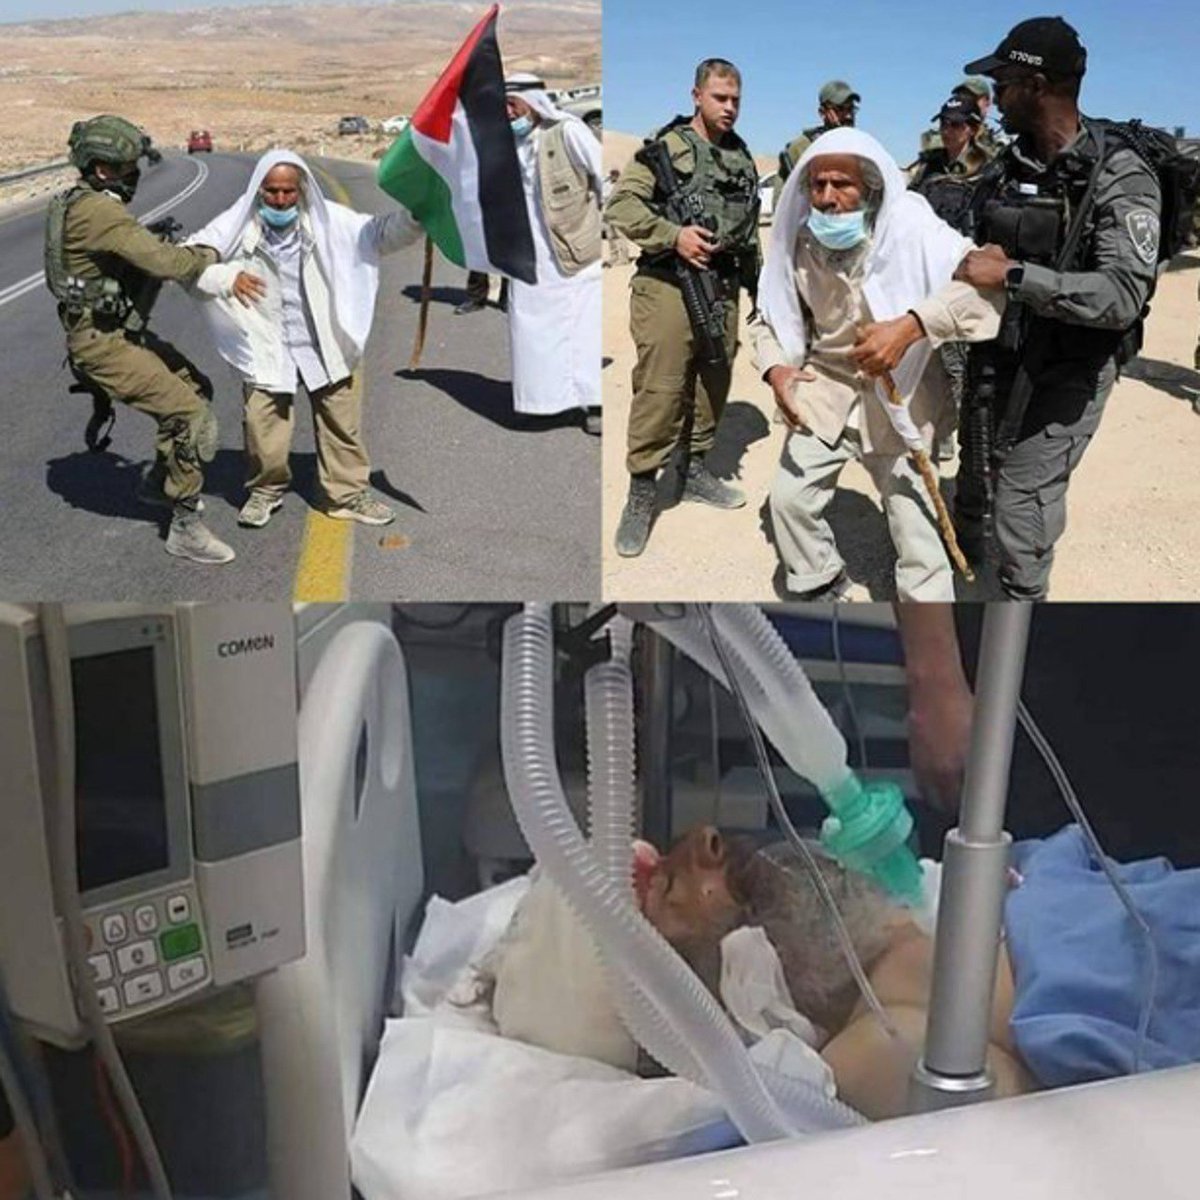 The elderly Palestinian activist, Haj Suleiman Hathalin succumbed to his injuries this morning after being run over and critically injured by an occupation police vehicle in the village of Umm al-Kheir, south of the occupied West Bank. #SahabatPalestina_ID